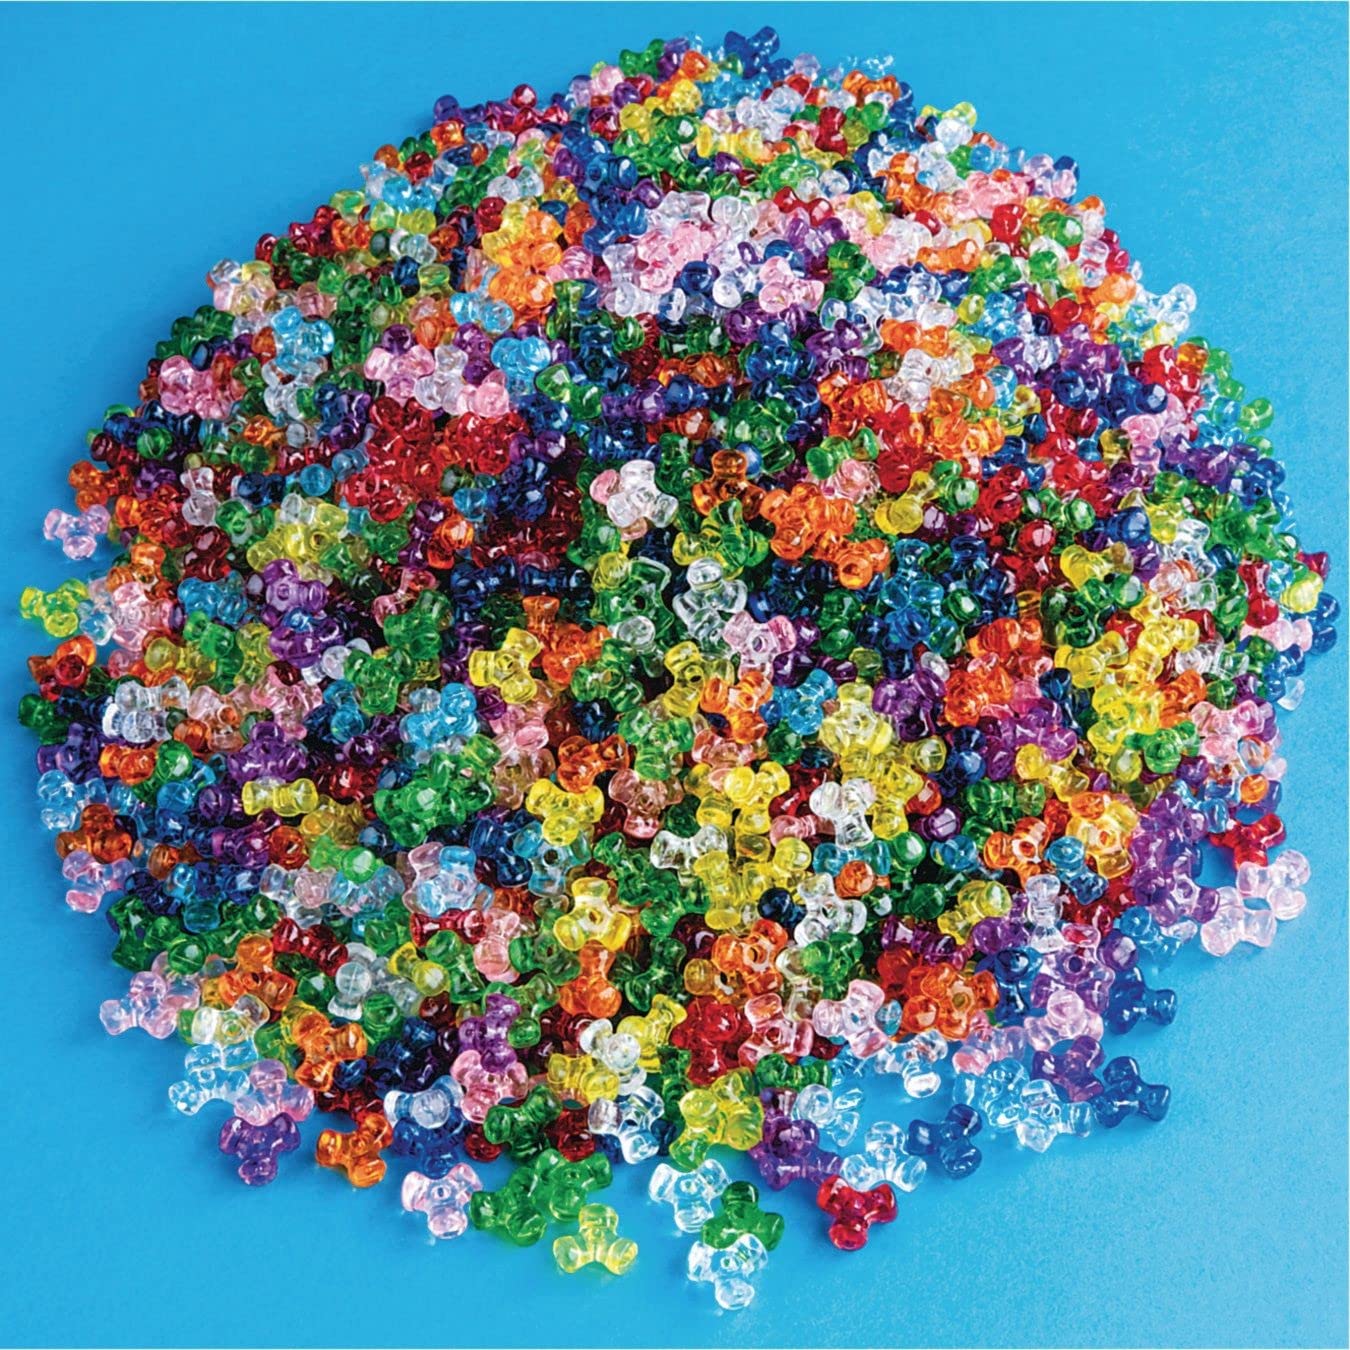 S&S Worldwide Tri-Bead Assortment. Great Mix of Transparent Colors Perfect for Jewelry Making with Elastic Cord or Wire, Plastic Beads - 11mm with 2mm Hole, 1lb. Bag - Approx. 3100 Beads